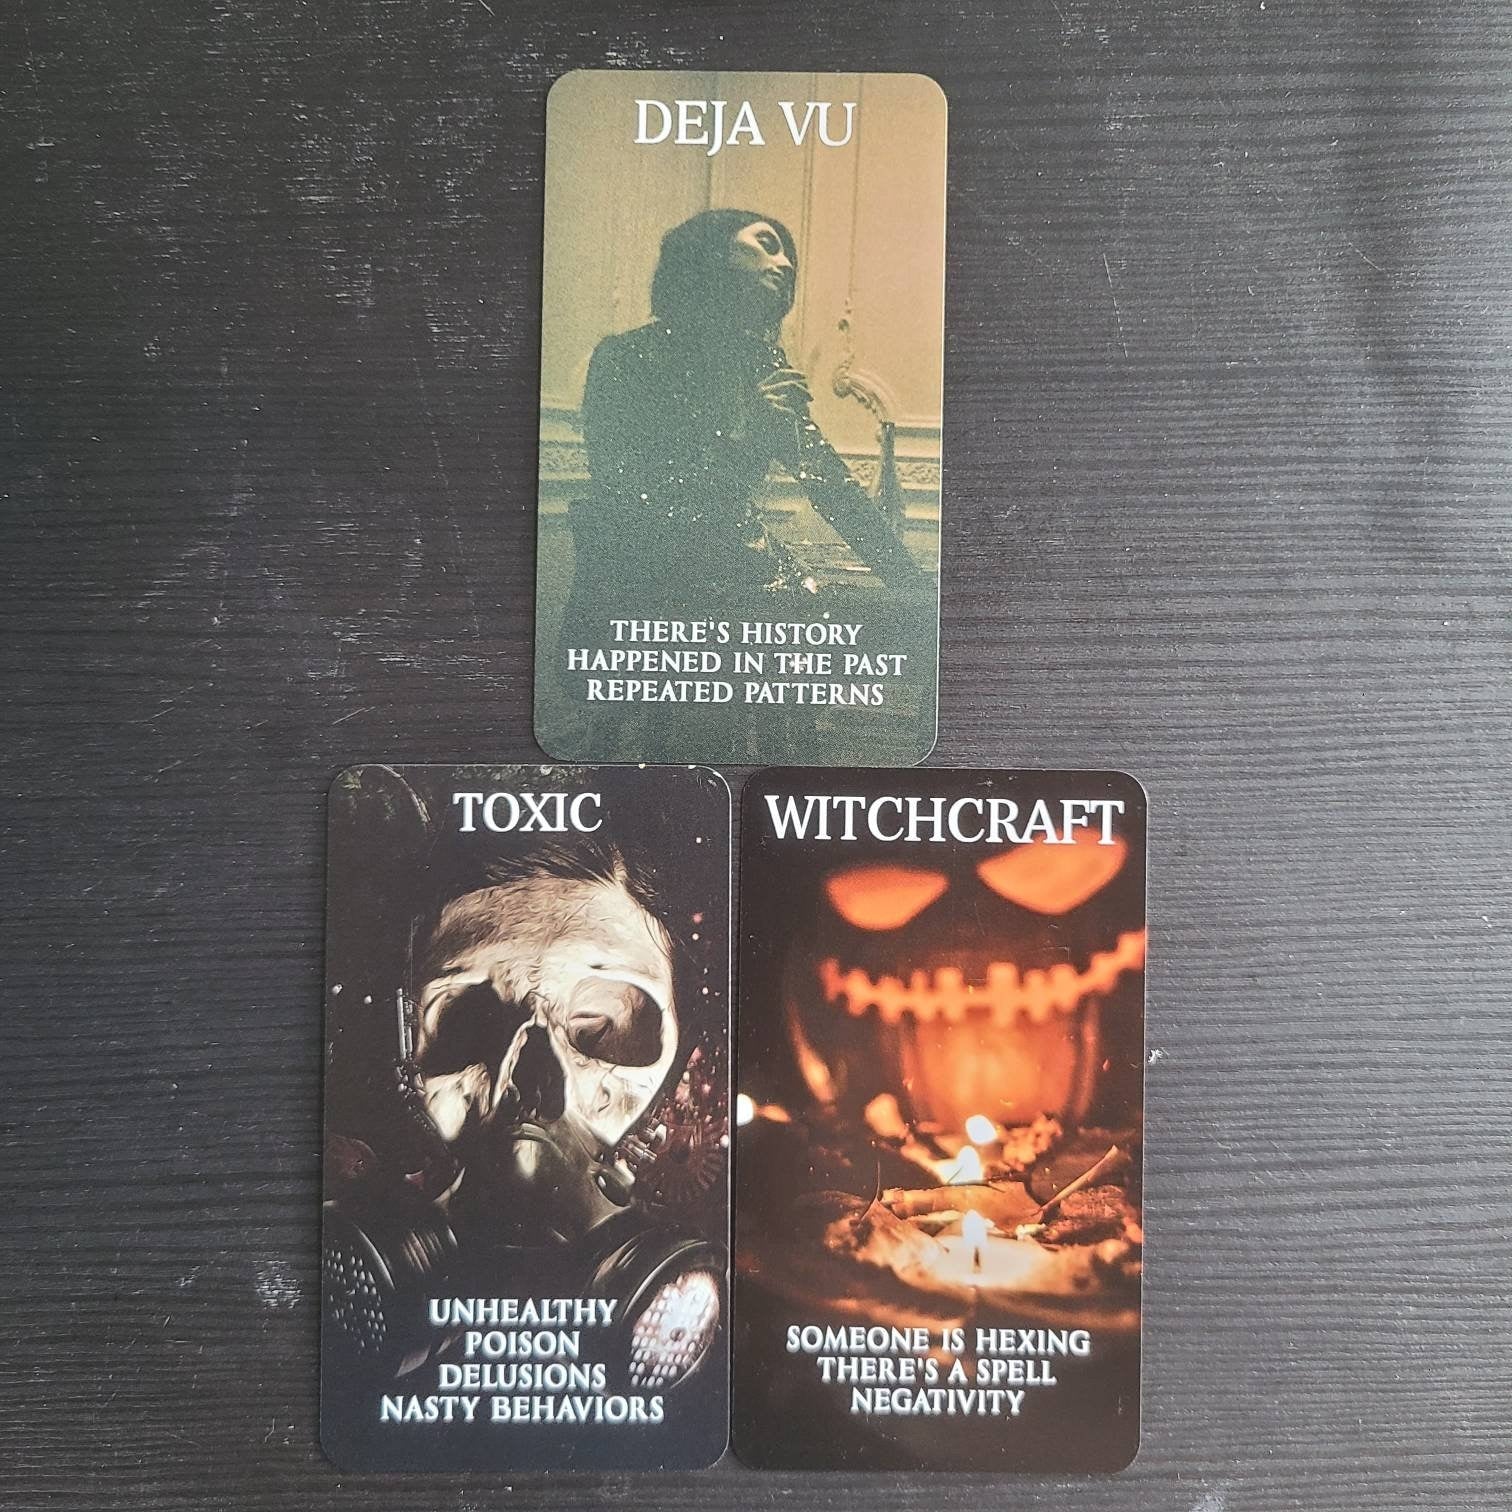 Mystic Black Rose Oracle Deck Situations Tarot Deck Twin Flame Deck Love Oracle Deck Messages Deck - MysticBluuMoonTarot